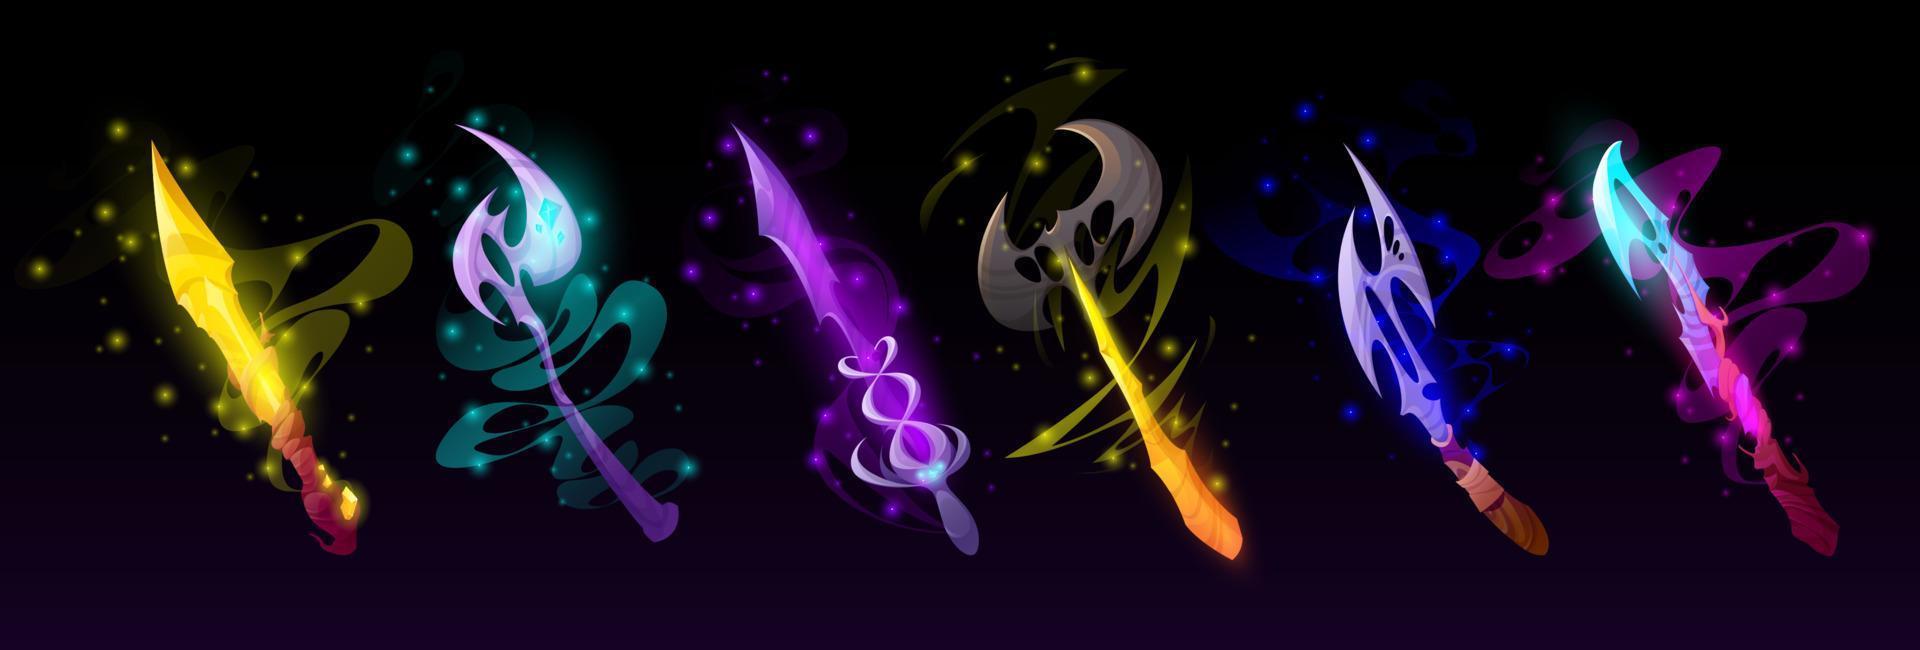 Magic swords, weapon for game interface vector